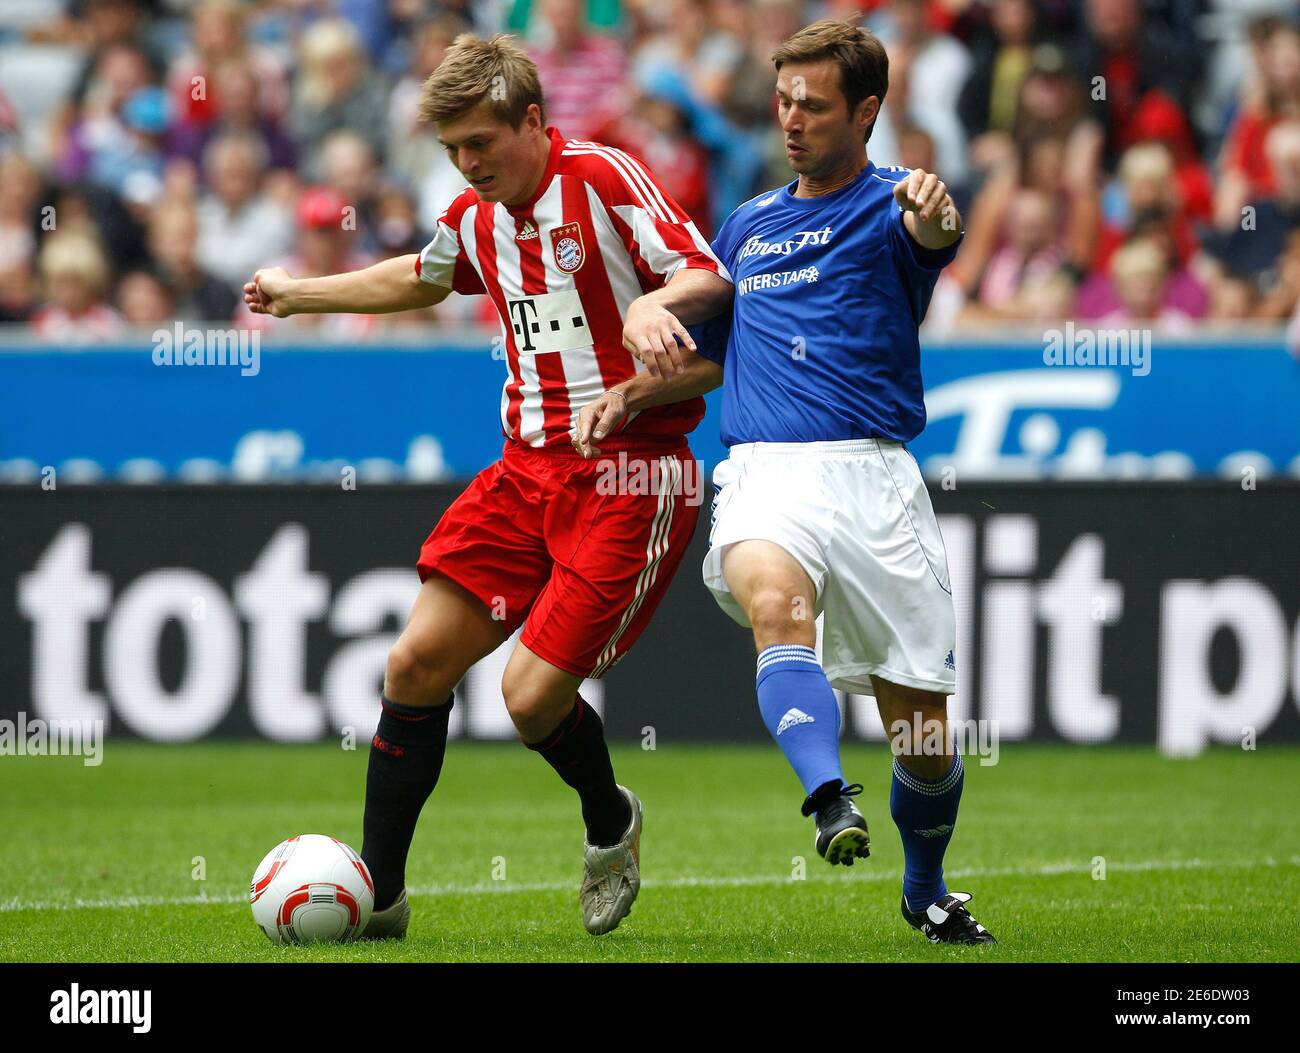 Bayern Munich's Toni Kroos (L) is tackled by Harald Cerny of the winter Olympic sport stars during a friendly soccer match in the Allianz Arena in Munich August 8, 2010.  REUTERS/Michaela Rehle (GERMANY - Tags: SPORT SOCCER) Stock Photo